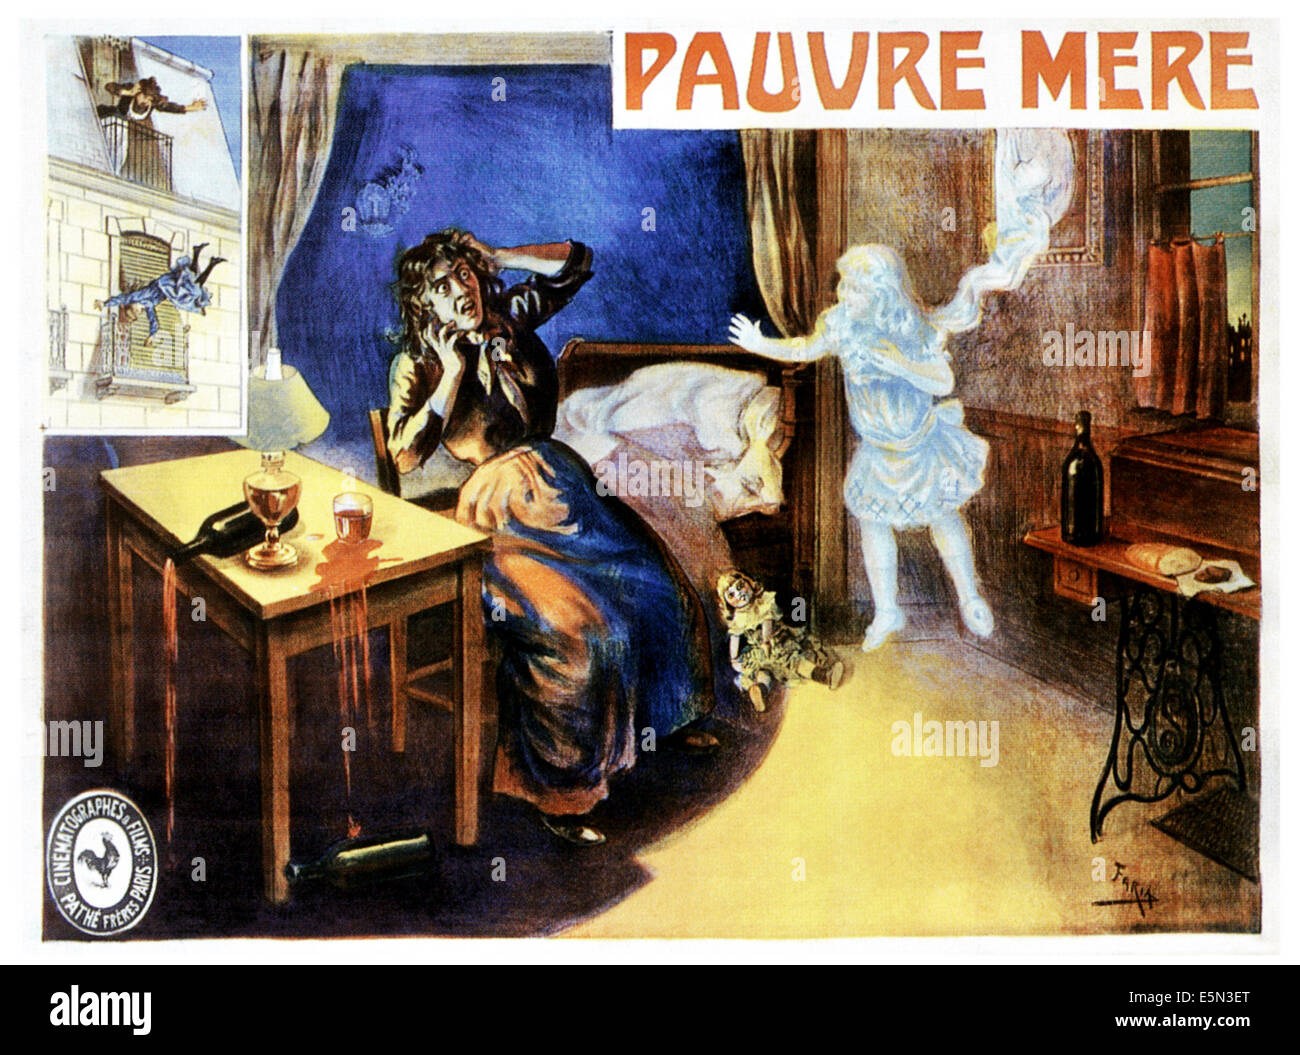 PAUVRE MERE, French poster art, 1906. Stock Photo